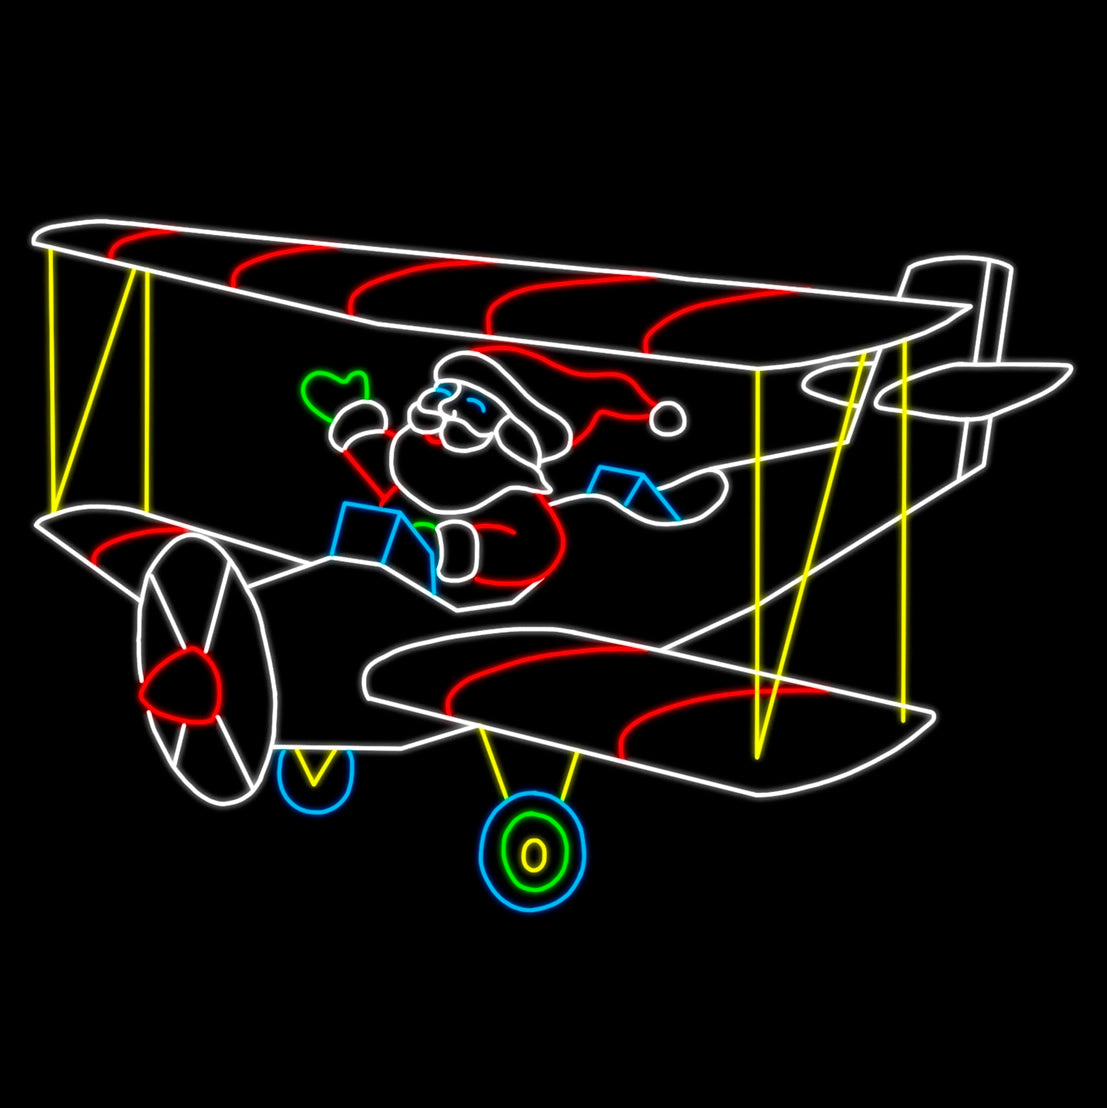 An animated silhouette LED display of Santa Claus flying a biplane. The biplane has red and white striped wings and yellow struts, with Santa waving from the cockpit and his Santa hat flowing behind him. The display is outlined with bright white, red, yellow, blue, and green LED lights, set against a black background.